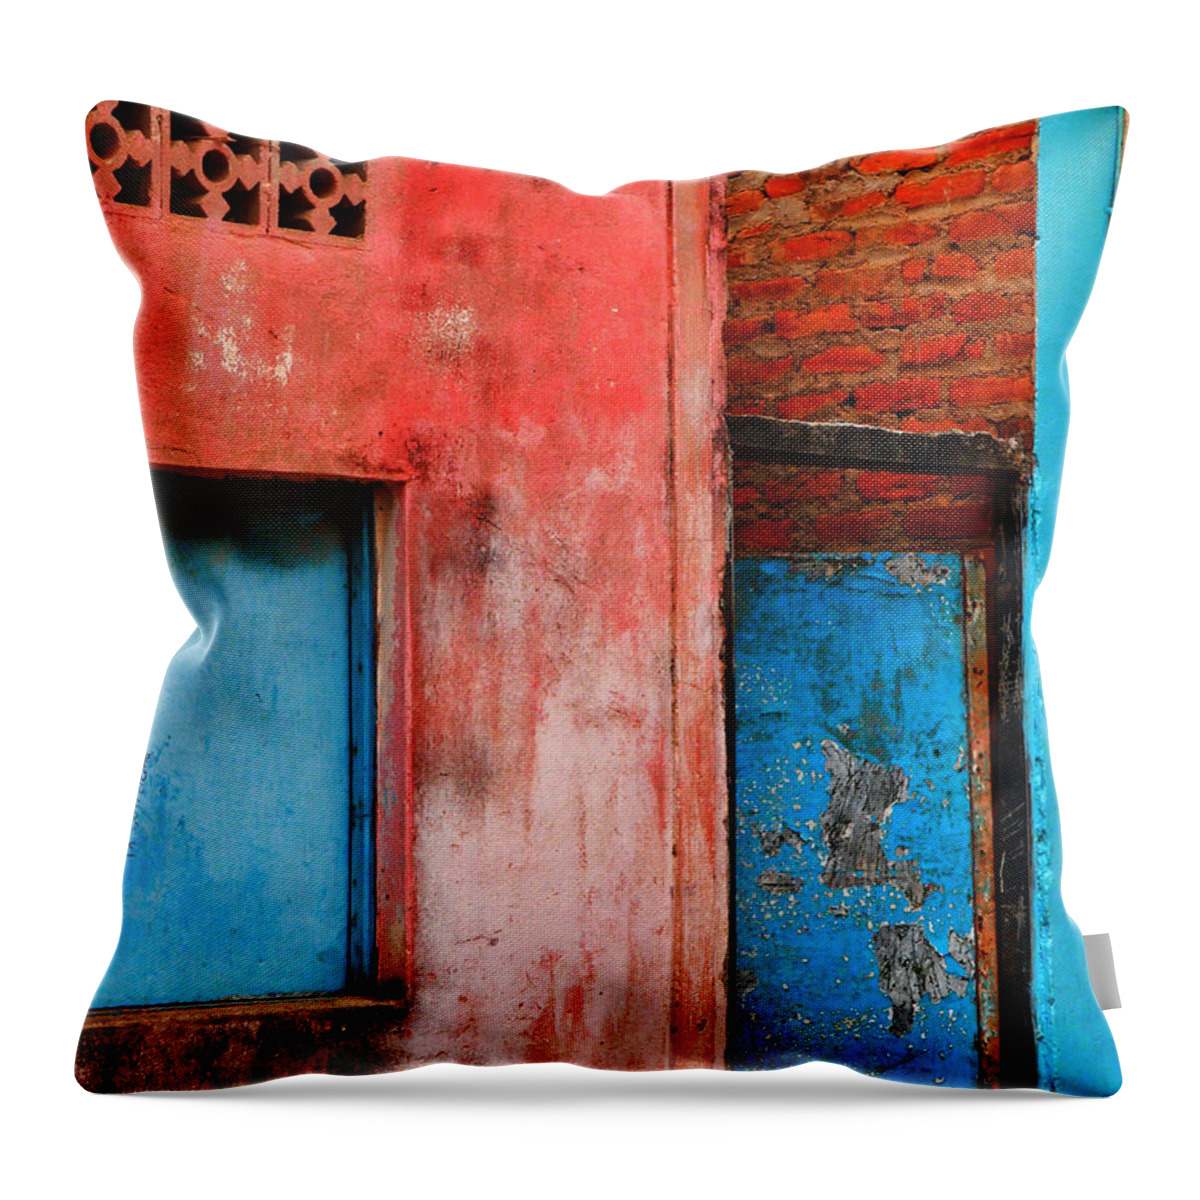 Rosa's Place Throw Pillow featuring the photograph Rosa's Place by Skip Hunt